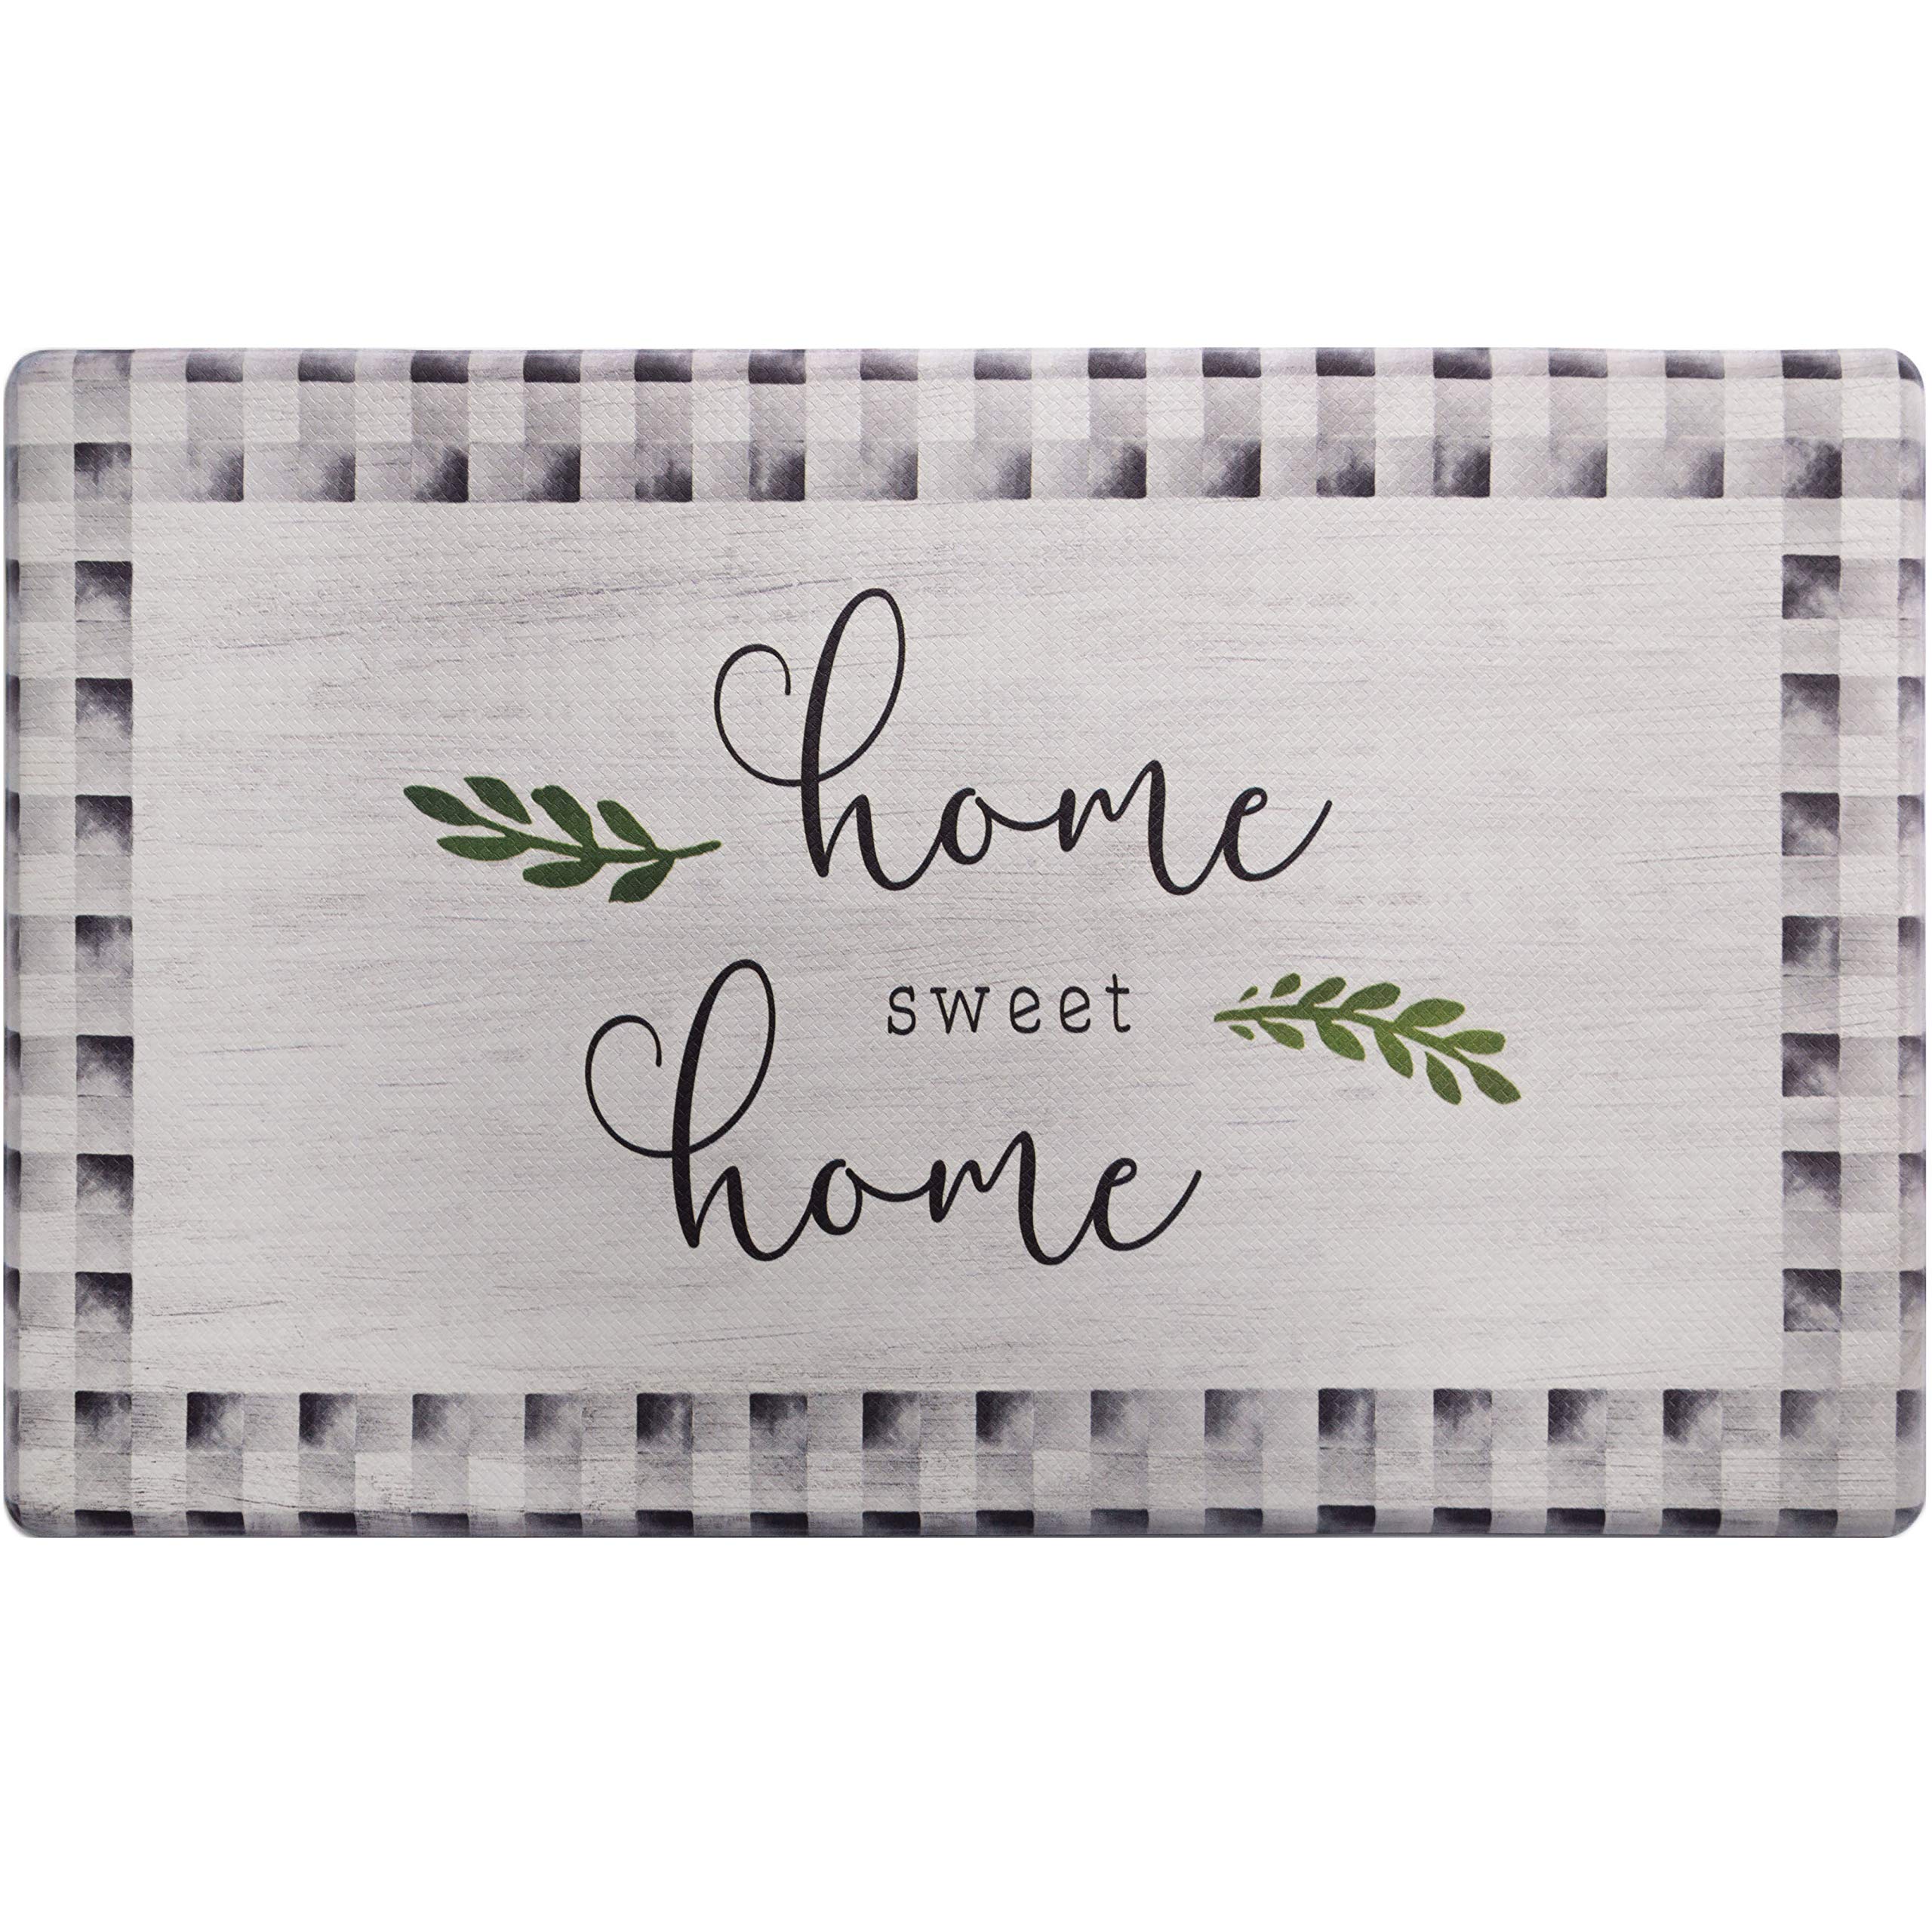 18" x 30" SoHome Cozy Living Cushioned Kitchen Mat (Home Sweet Home) $7.43 + Free Shipping w/ Prime or on orders over $35